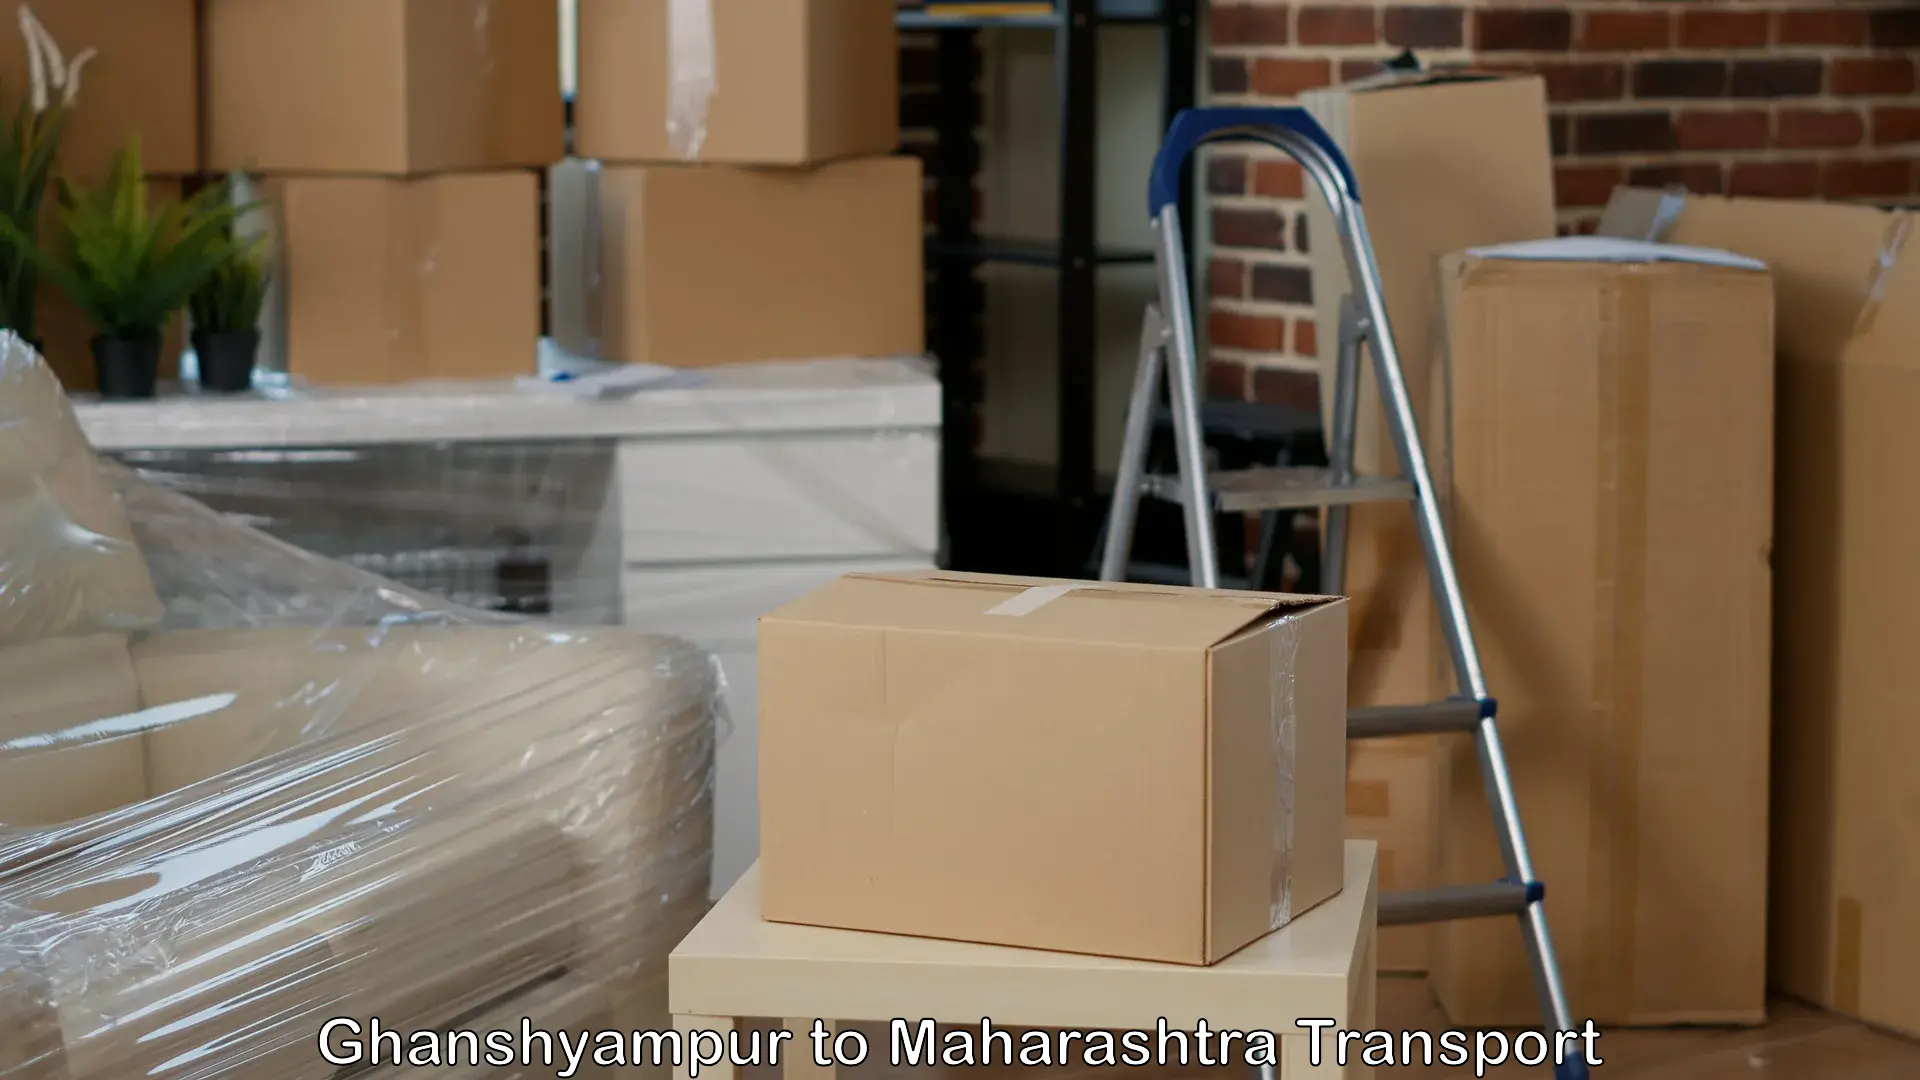 Container transport service Ghanshyampur to Bhokar